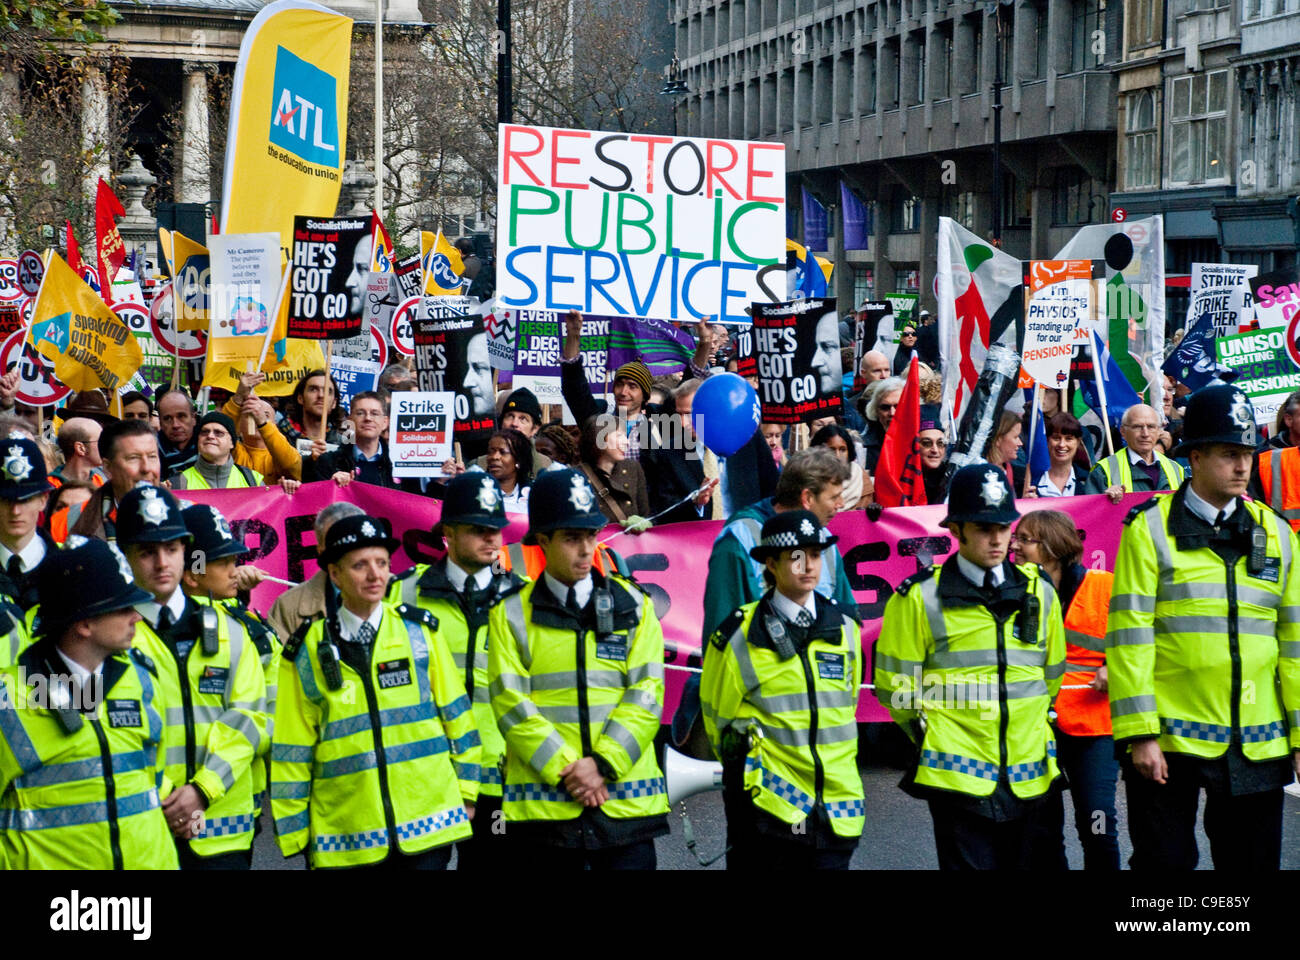 London, UK. 30th Nov, 2011. Thousands of striking public sector workers march through the streets of London in protest at Government plans for pension reform. It is estimated that as many as two million public sector workers took part in the strikes across the UK Stock Photo